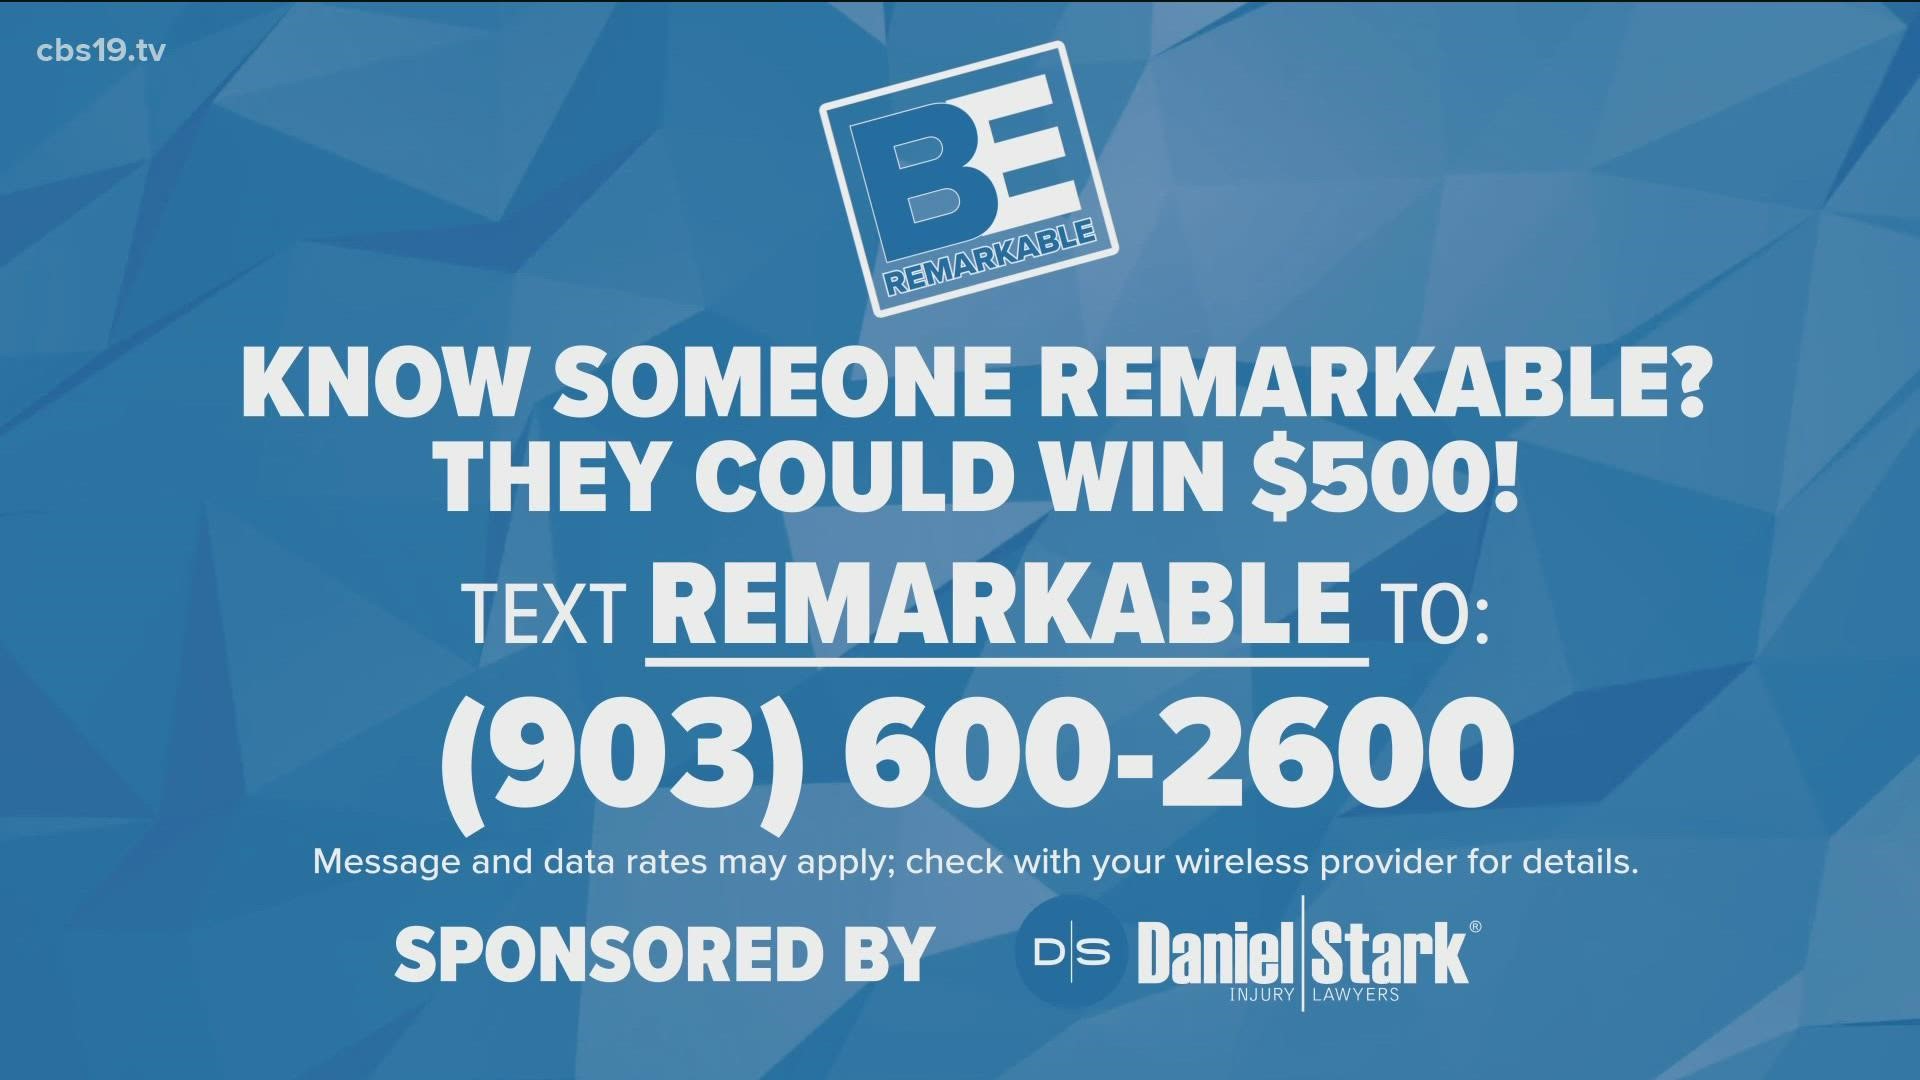 If you know someone who is remarkable in East Texas, nominate them for Be Remarkable by texting "Remarkable" to our CBS19 helpline at 903-600-2600.